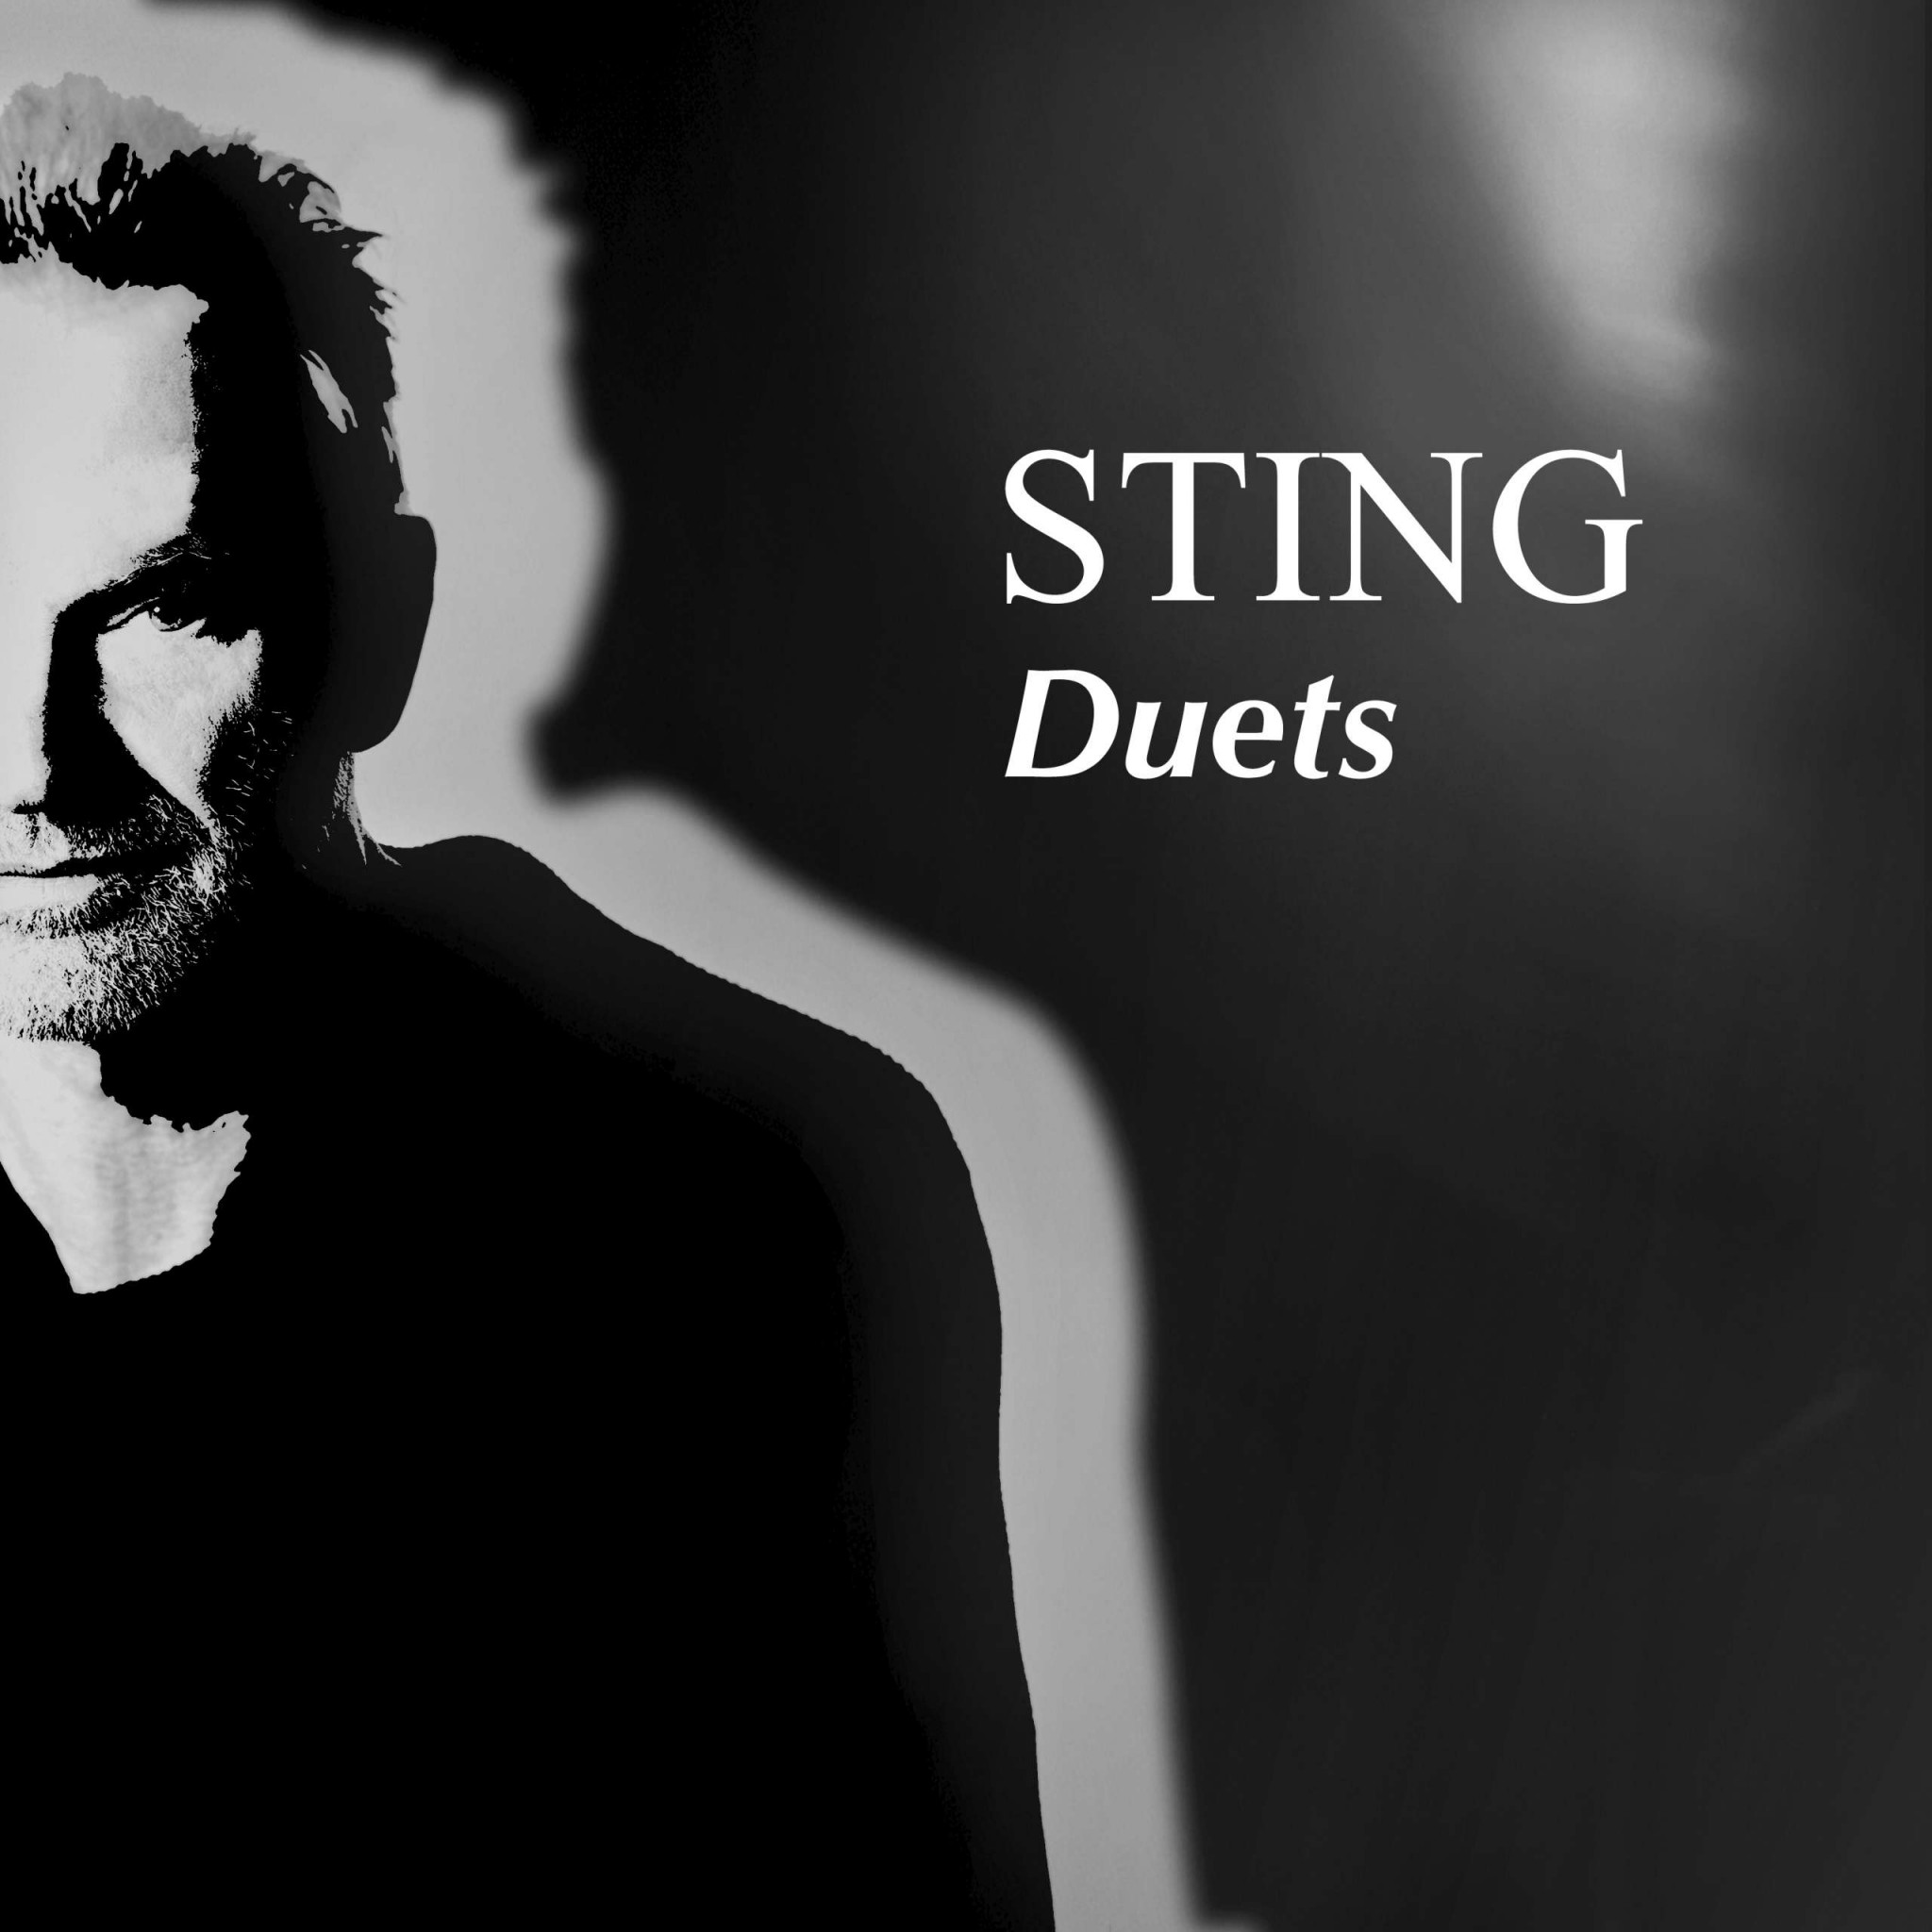 Sting’s New Album 'Duets' To Be Released March 19, 2021 That Eric Alper